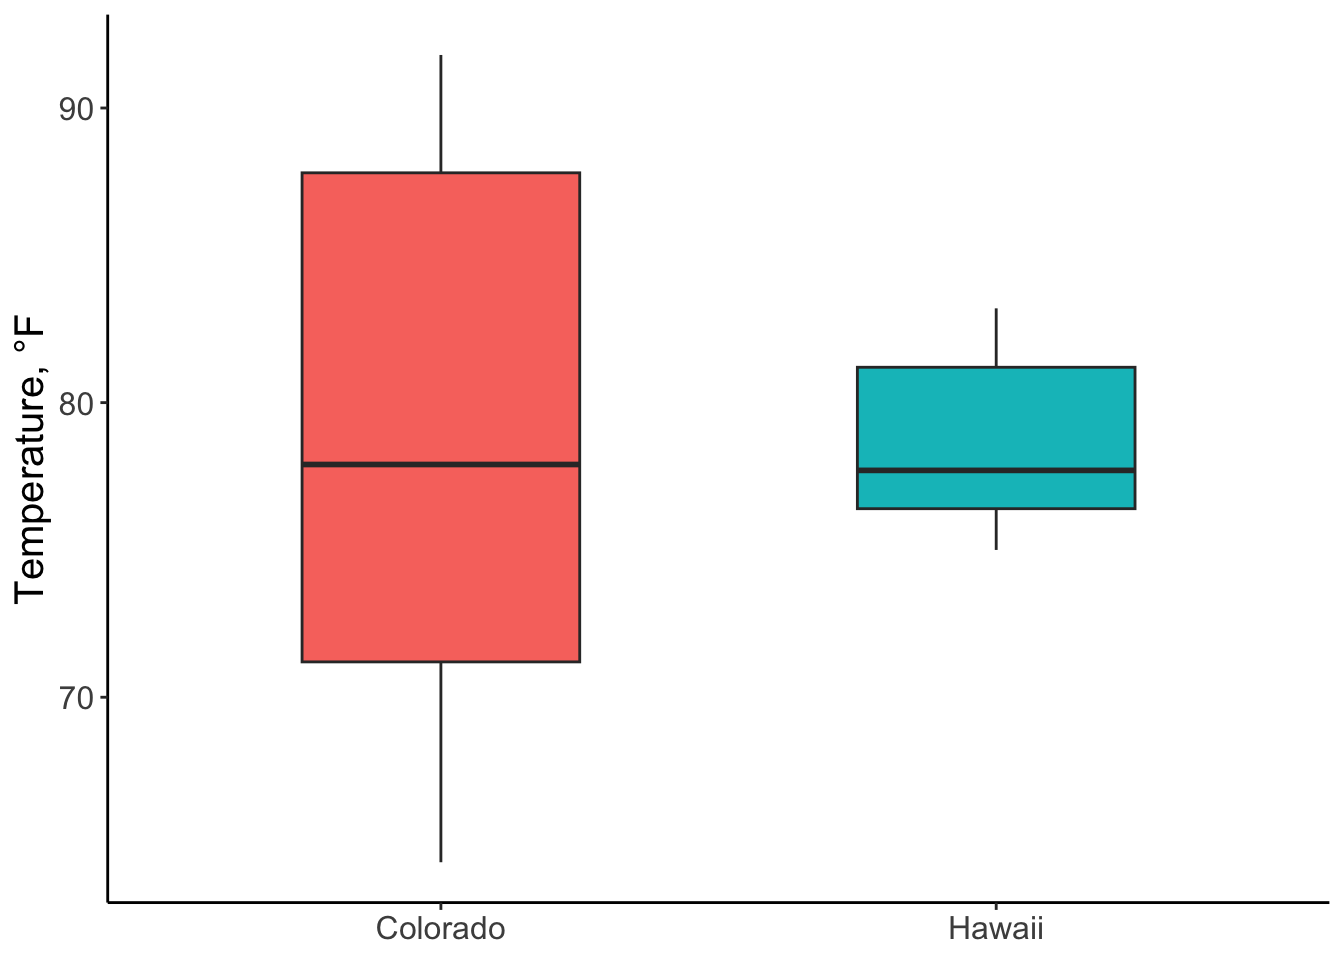 Boxplots of hourly temperatures in CO and HI for July, 2010. Whiskers represent 1.5*IQR.